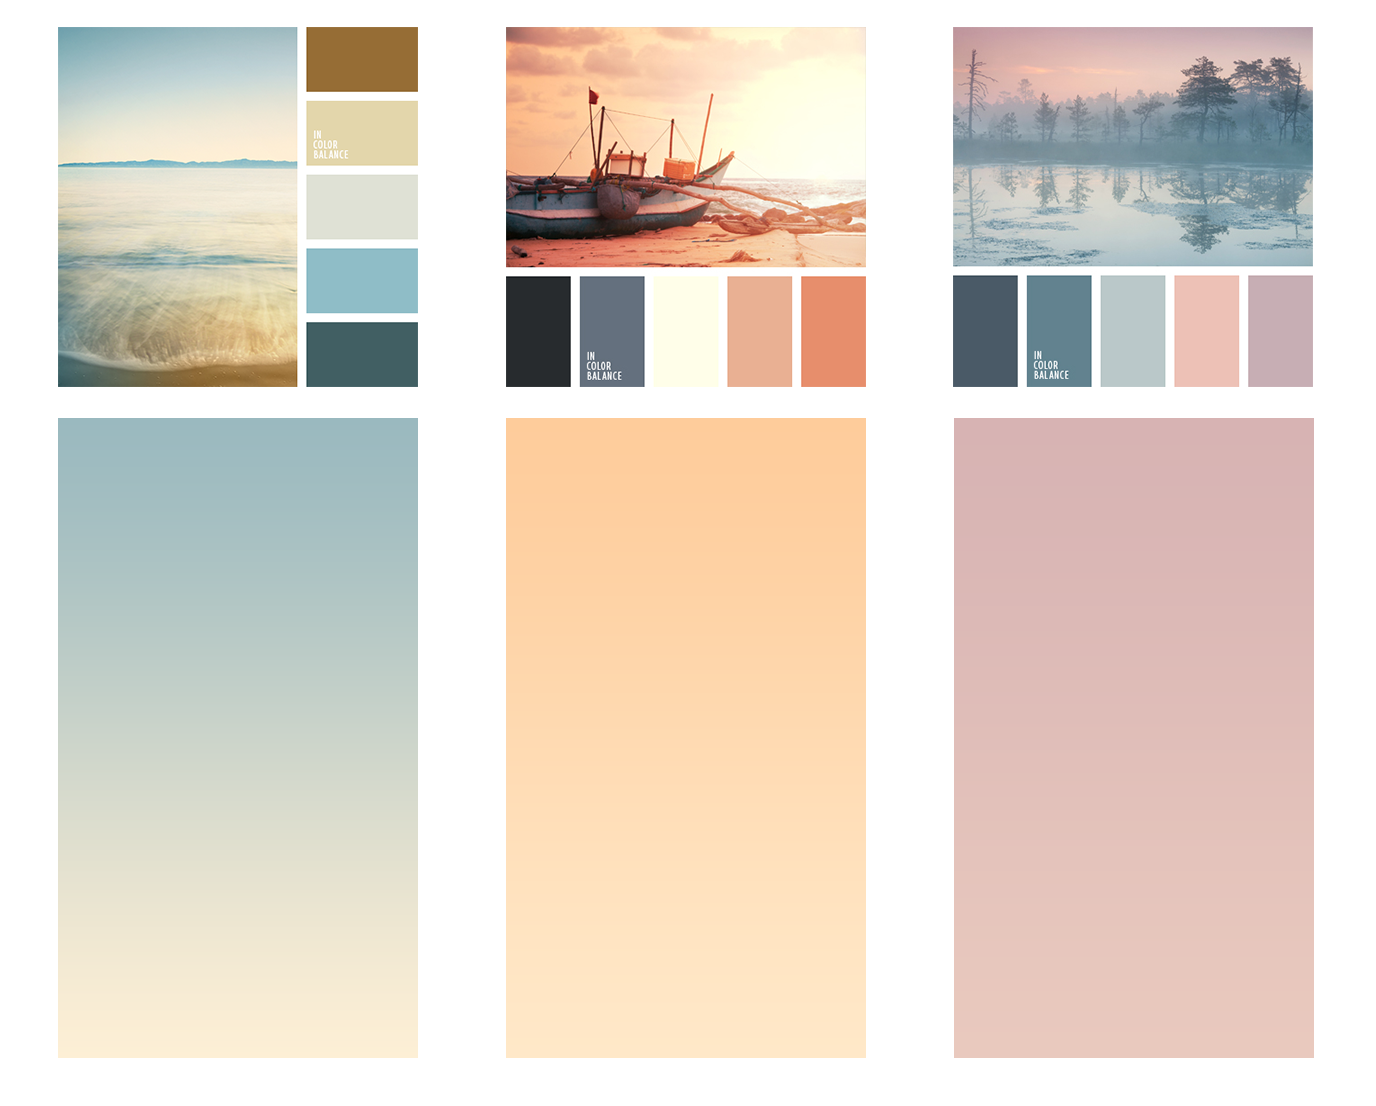 The Secret of Great Gradient. Inspired by Nature | by Anna Grenn | UX Planet